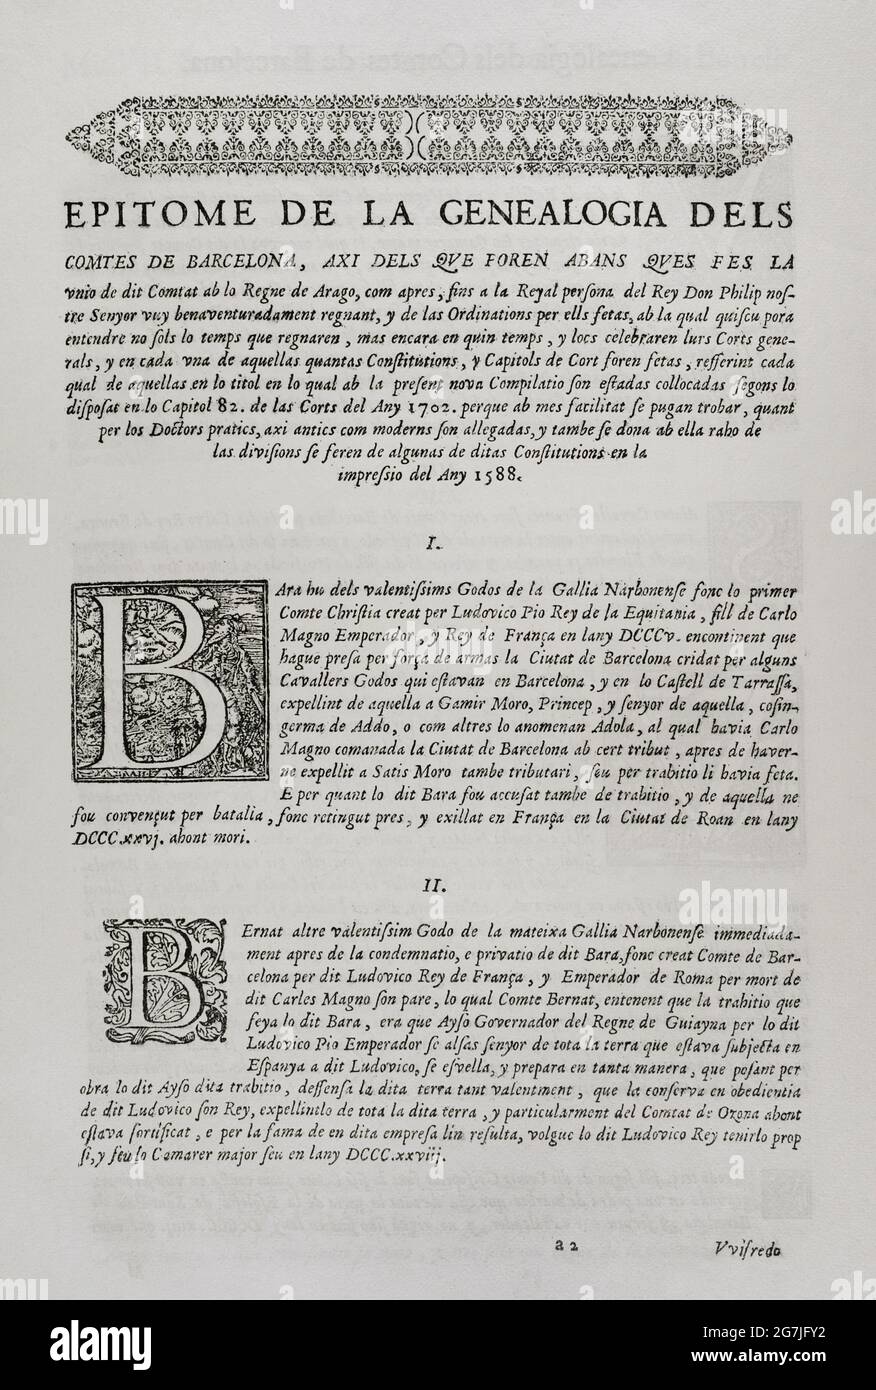 Constitutions y Altres Drets de Cathalunya, compilats en virtut del Capítol de Cort LXXXII, de las Corts per la S.C.Y.R. Majestat del rey Don Philip IV, nostre senyor celebradas en la ciutat de Barcelona any MDCII. (Constitutions and Other Rights of Catalonia, compiled by virtue of the Court Chapter LXXXII, of the Courts chaired by Philip V and which were held in the city of Barcelona. 1702). First Volume. Printed in the House of Joan Pau Martí and Joseph Llopis Estampers, 1704. Epitome of the Counts of Barcelona's Genealogy. Historical Military Library of Barcelona, Catalonia, Spain. Stock Photo